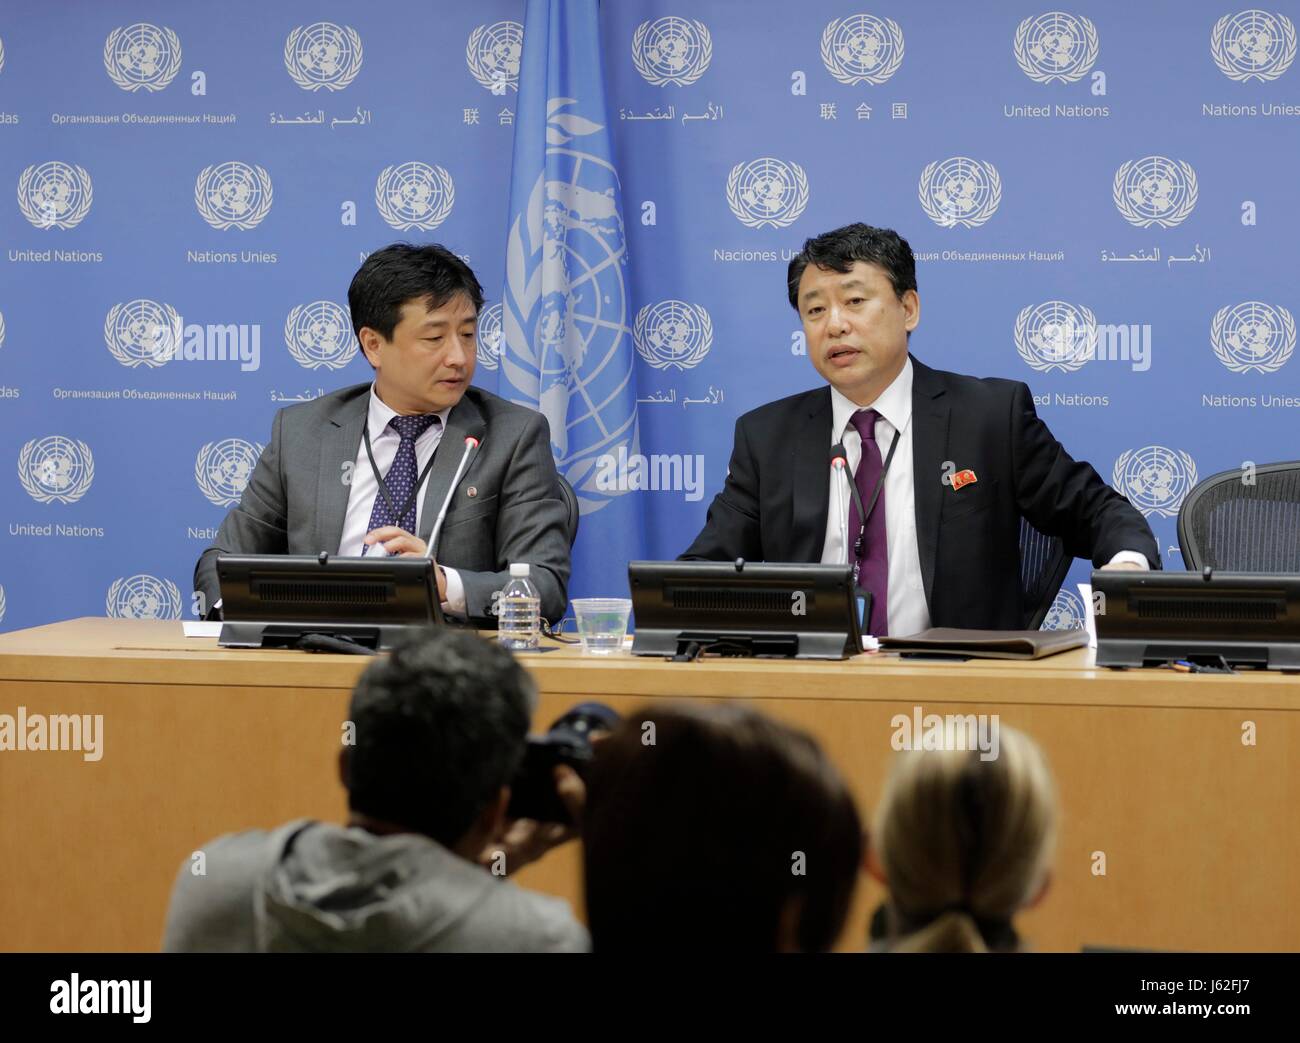 United Nations, New York, USA, May 19 2017 - Kim In Ryong (right), Deputy Permanent Representative of the Democratic Peoples Republic of Korea (DPRK) to the UN, briefs Journalists on the US Planning of Introducing more Sanctions at the Security Council Against his Country today at the UN Headquarters in New York. Photo: Luiz Rampelotto/EuropaNewswire | usage worldwide Stock Photo